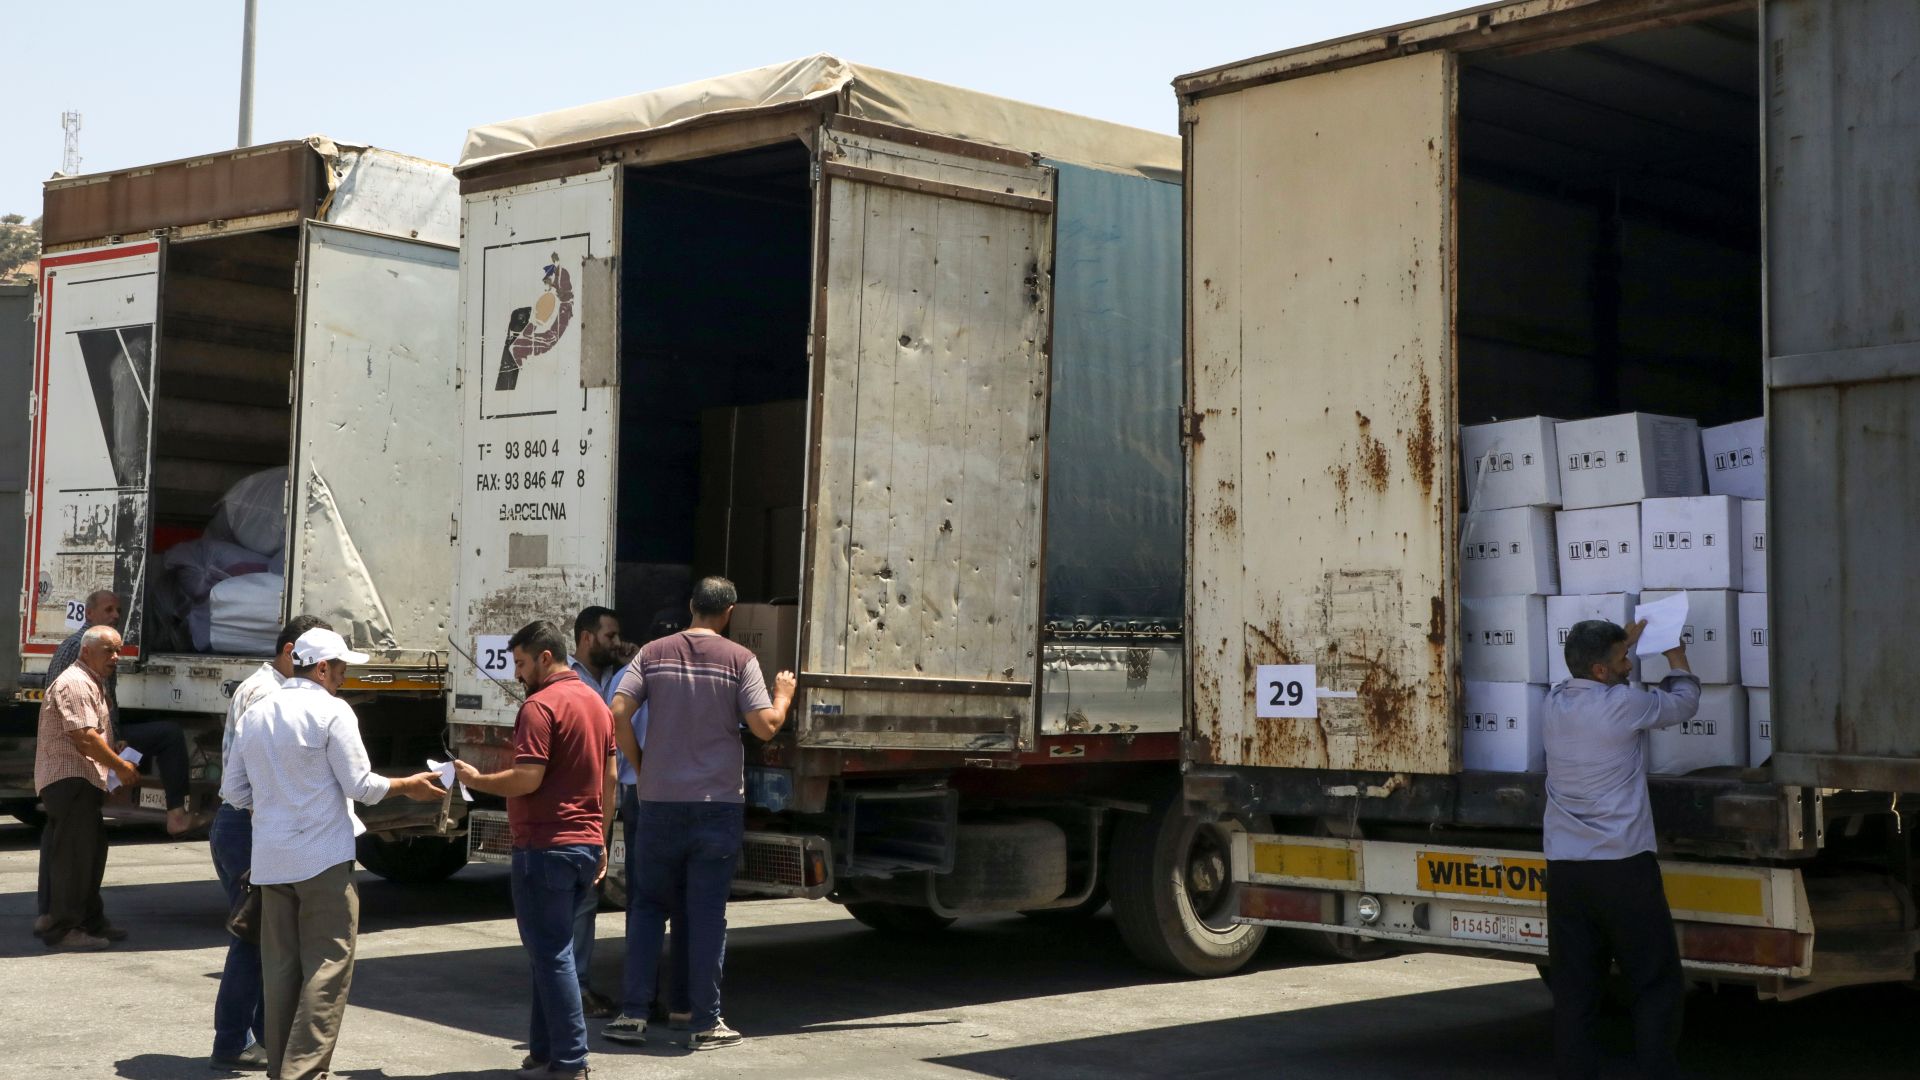 People stand near trucks loaded with humanitarian aid at Bab al-Hawa crossing at the Syrian-Turkish border, in Idlib governorate